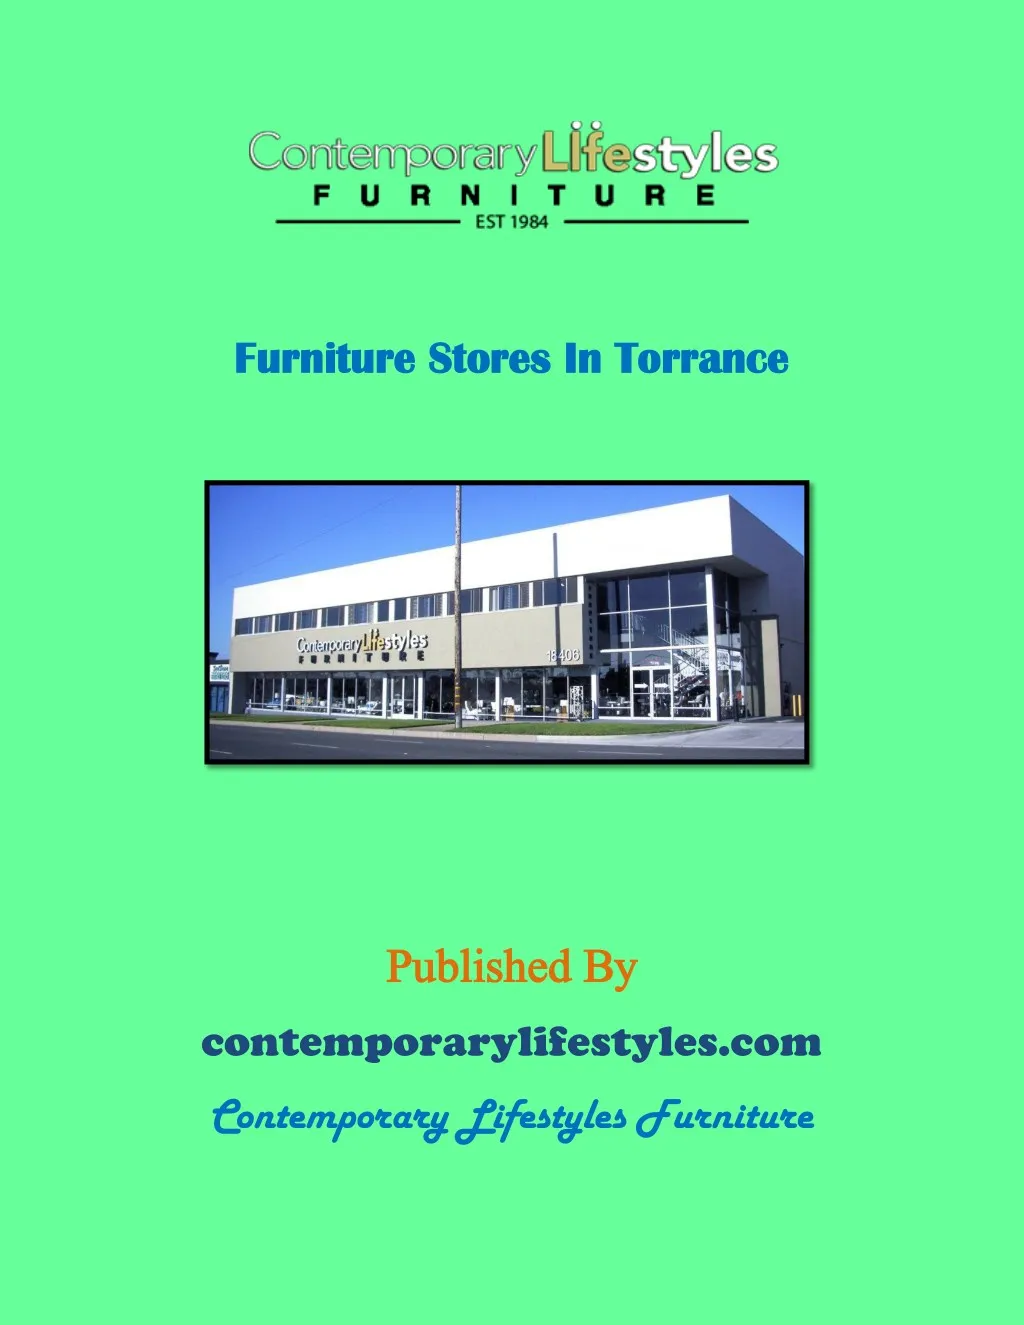 furniture stores in torrance furniture stores